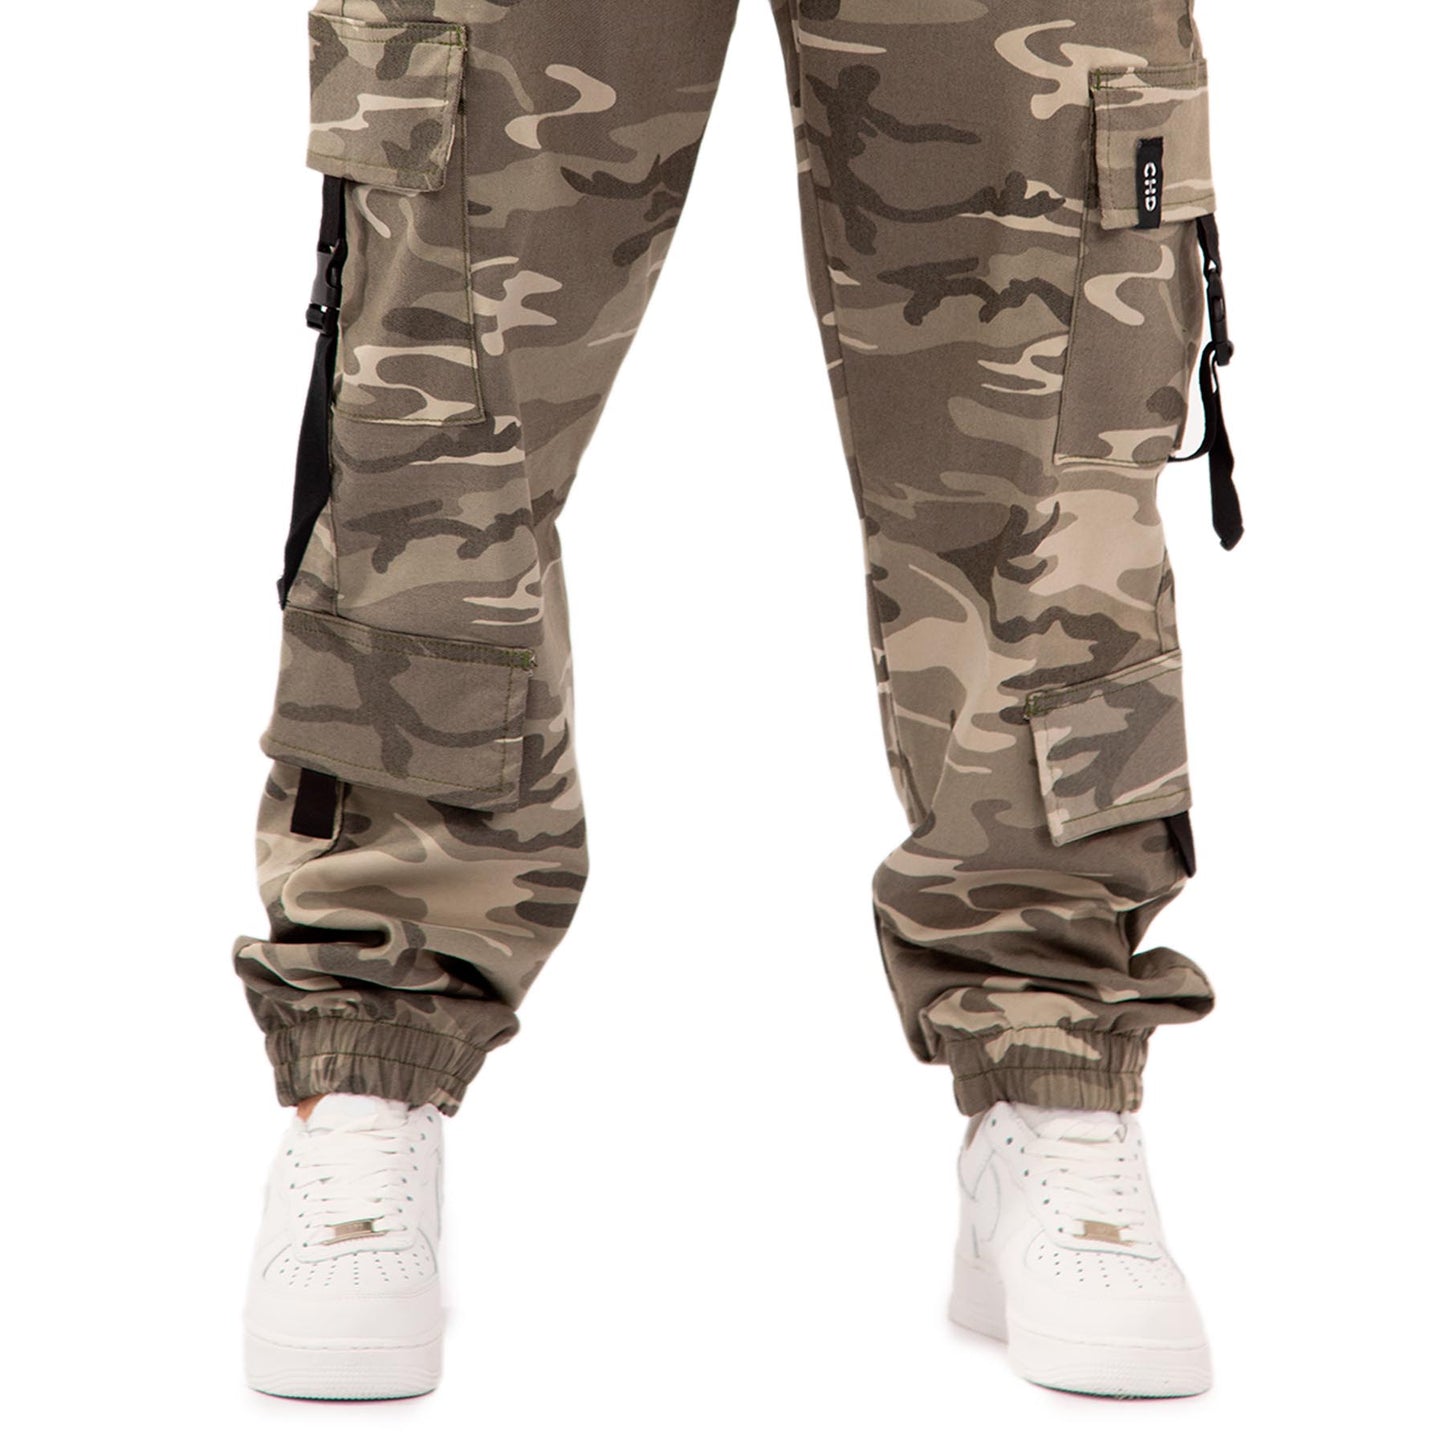 Wild cammo Double Cargo Pants Mujer color: VERDE 8120